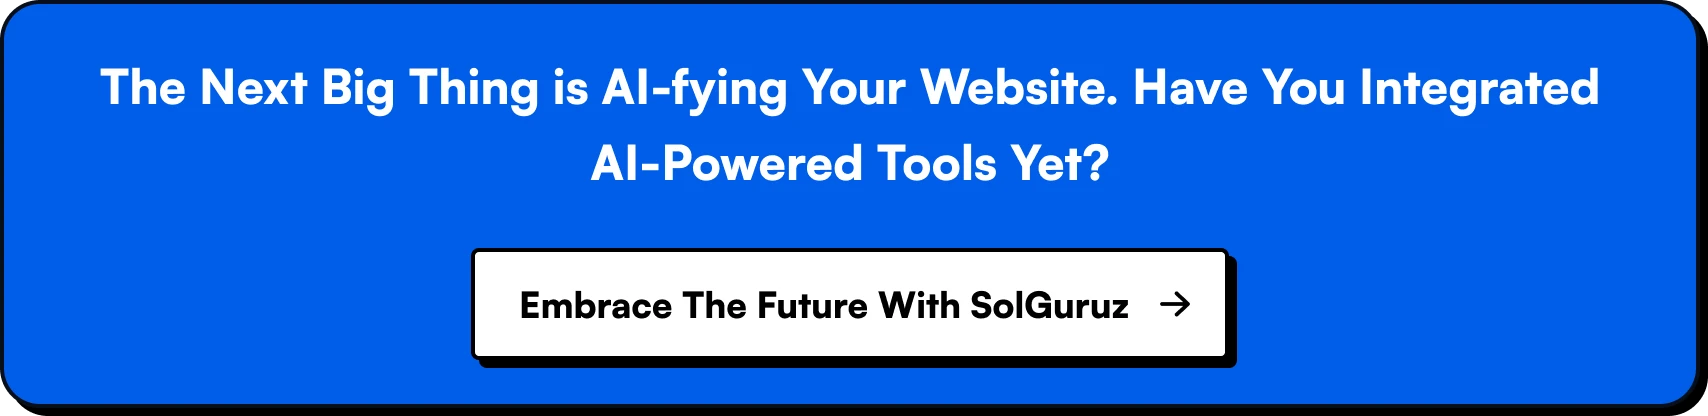 The Next Big Thing is AI-fying Your Website. Have You Integrated AI-Powered Tools Yet?